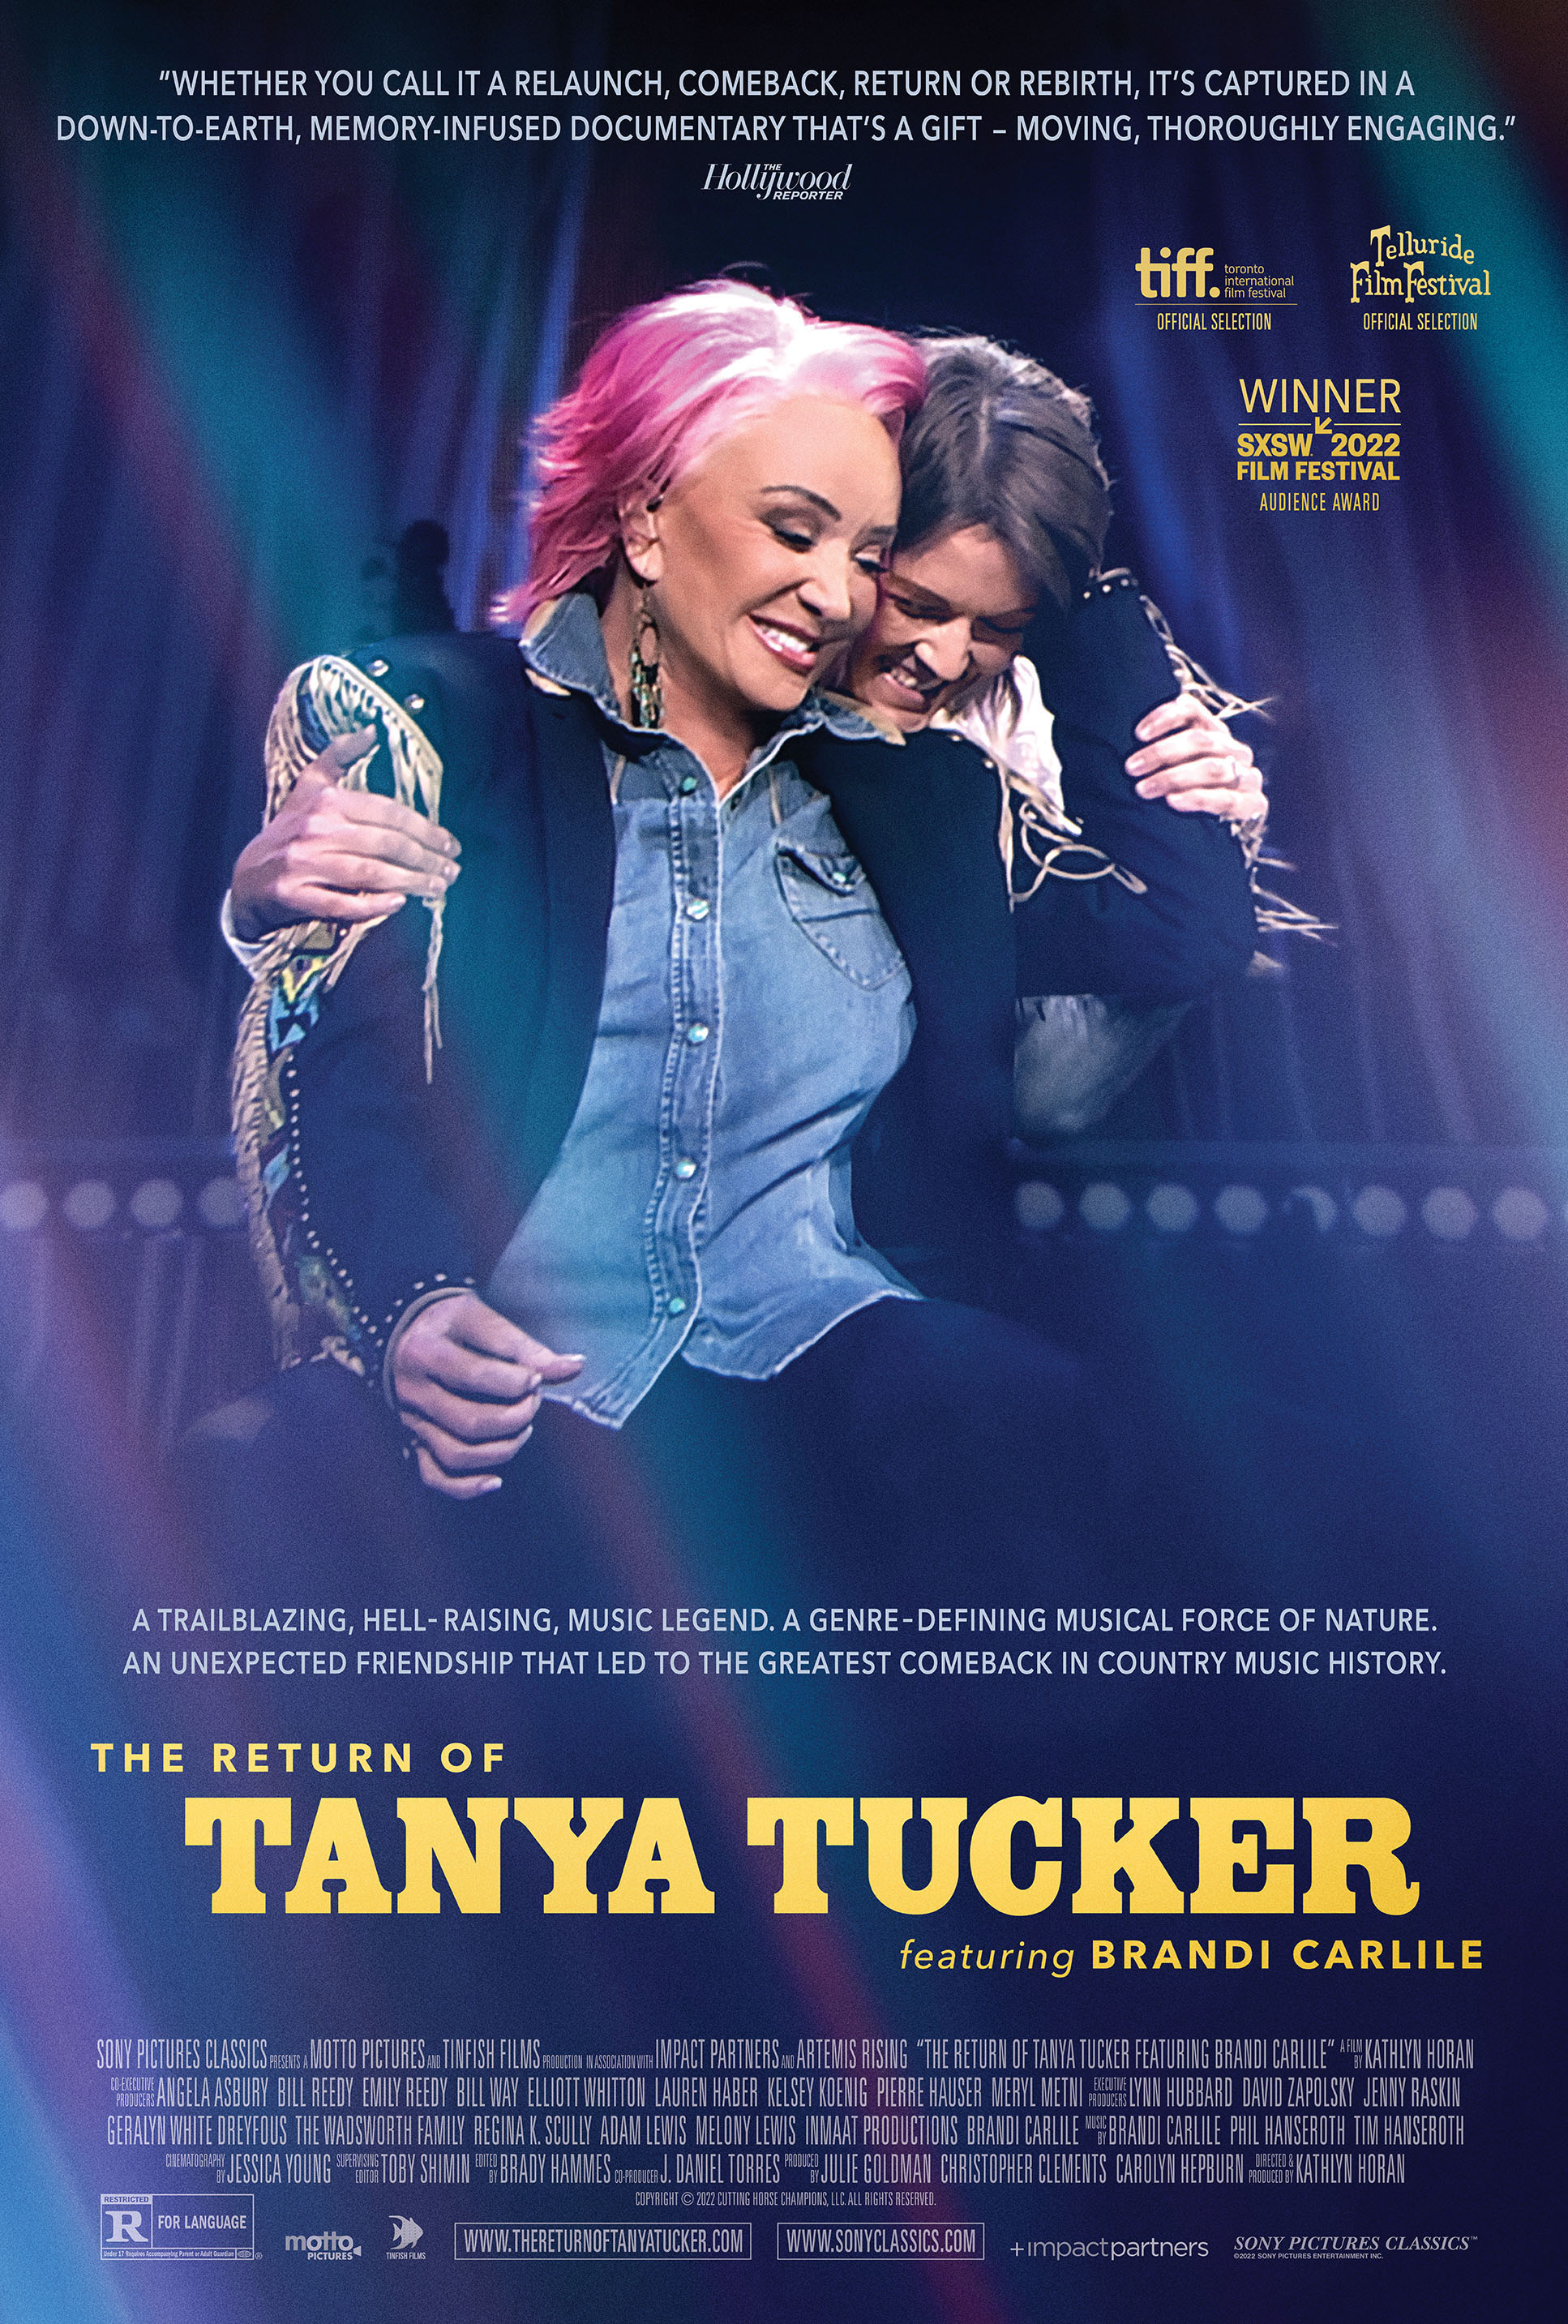 Watch the Trailer for THE RETURN OF TANYA TUCKER - Featuring Brandi Carlile